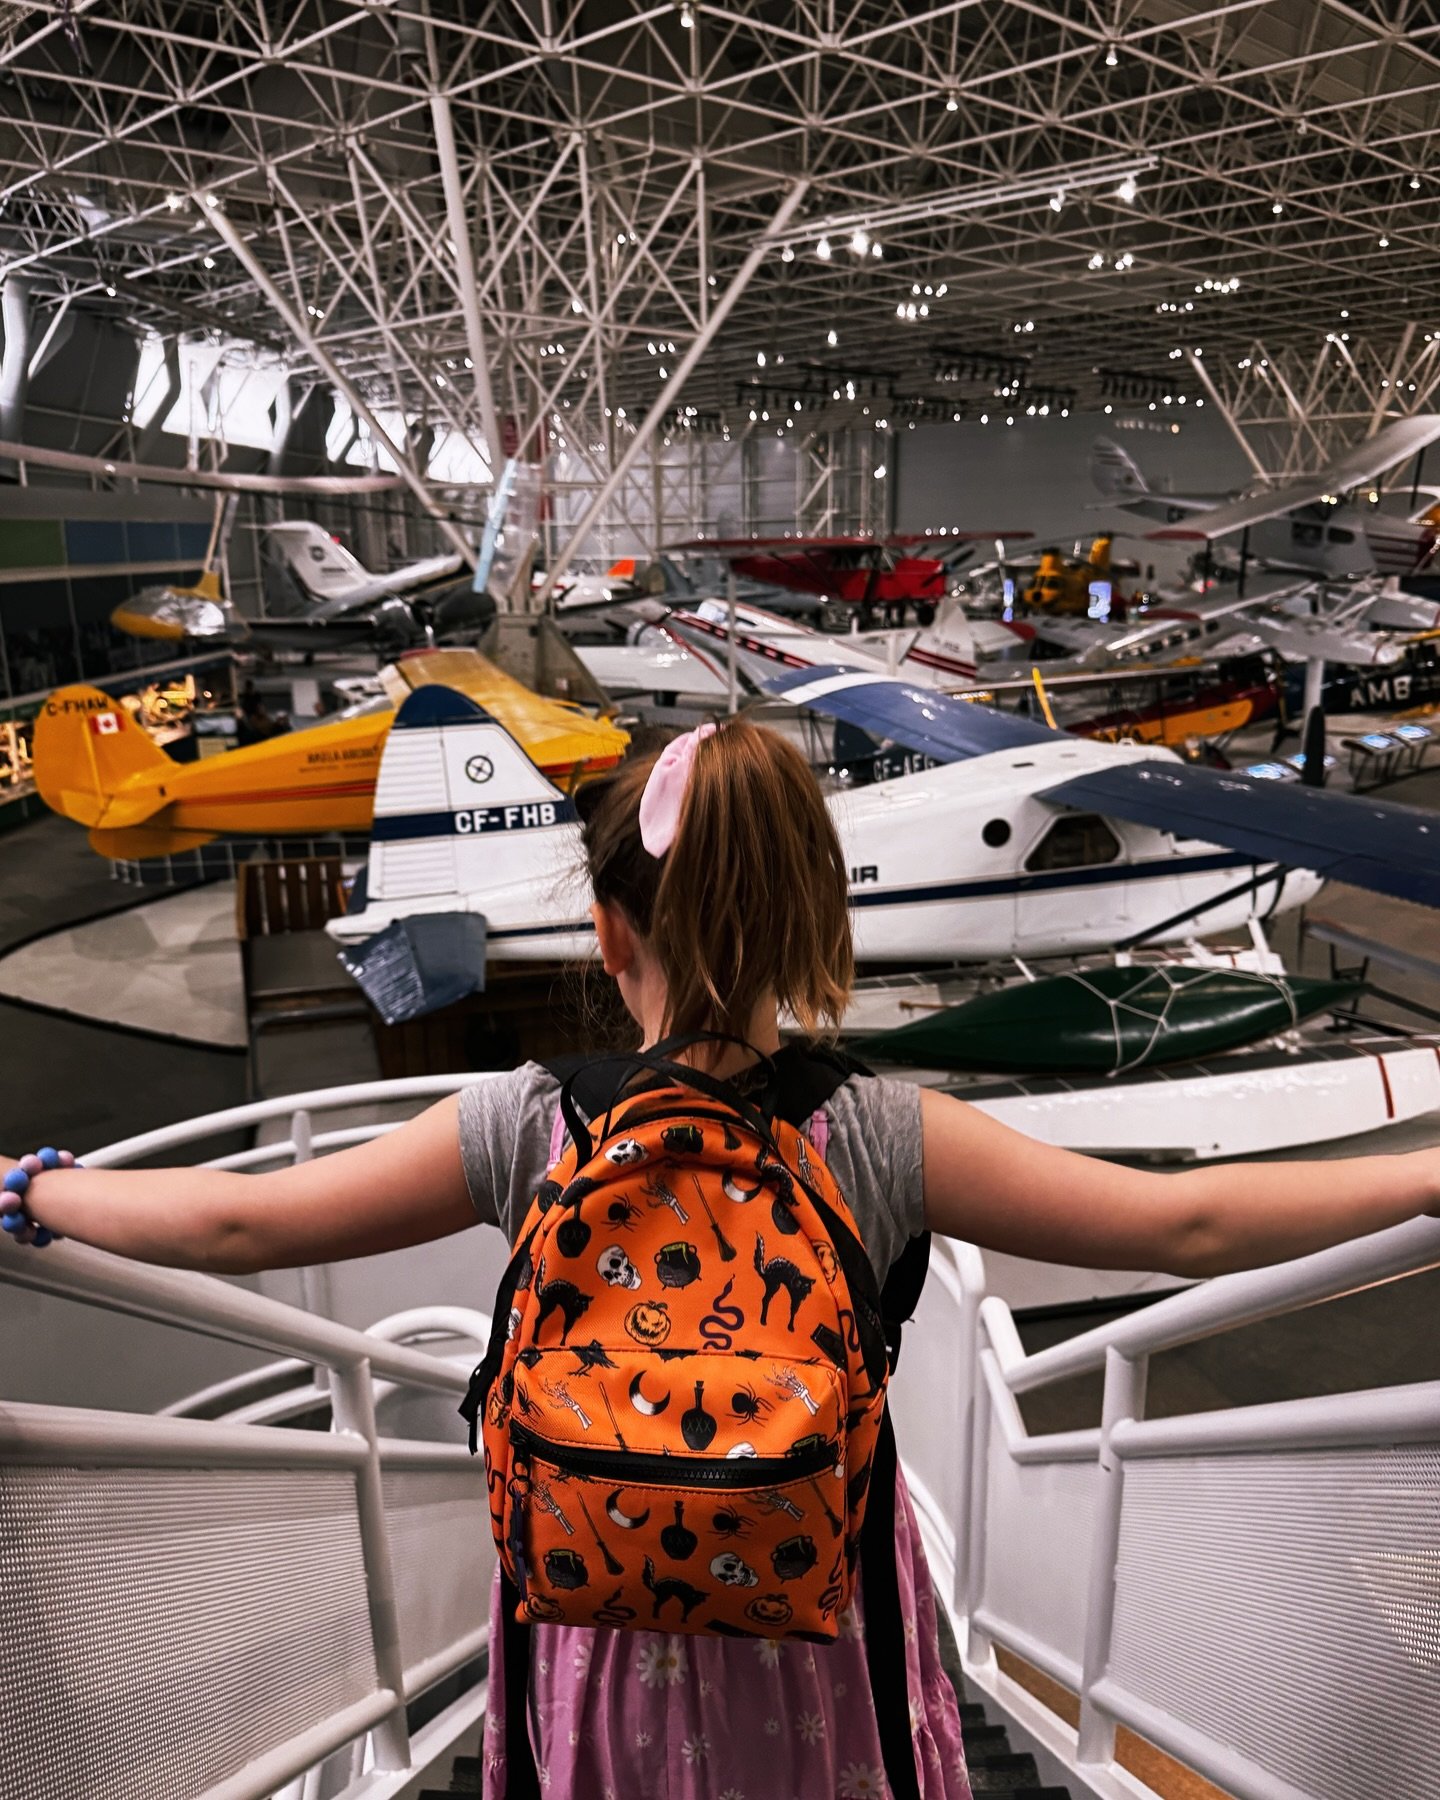 March Break is for ✈️ exploring 🚀 

Any last weekend plans? 

🪐

(and yes, we love Halloween all year round 🧡)
#avspacemuseum #ingenium #explore613 #ottawa #613marchbreak #ottawatourism #museumsoftheworld #aviationmuseum #spacemuseum #canadaaviati